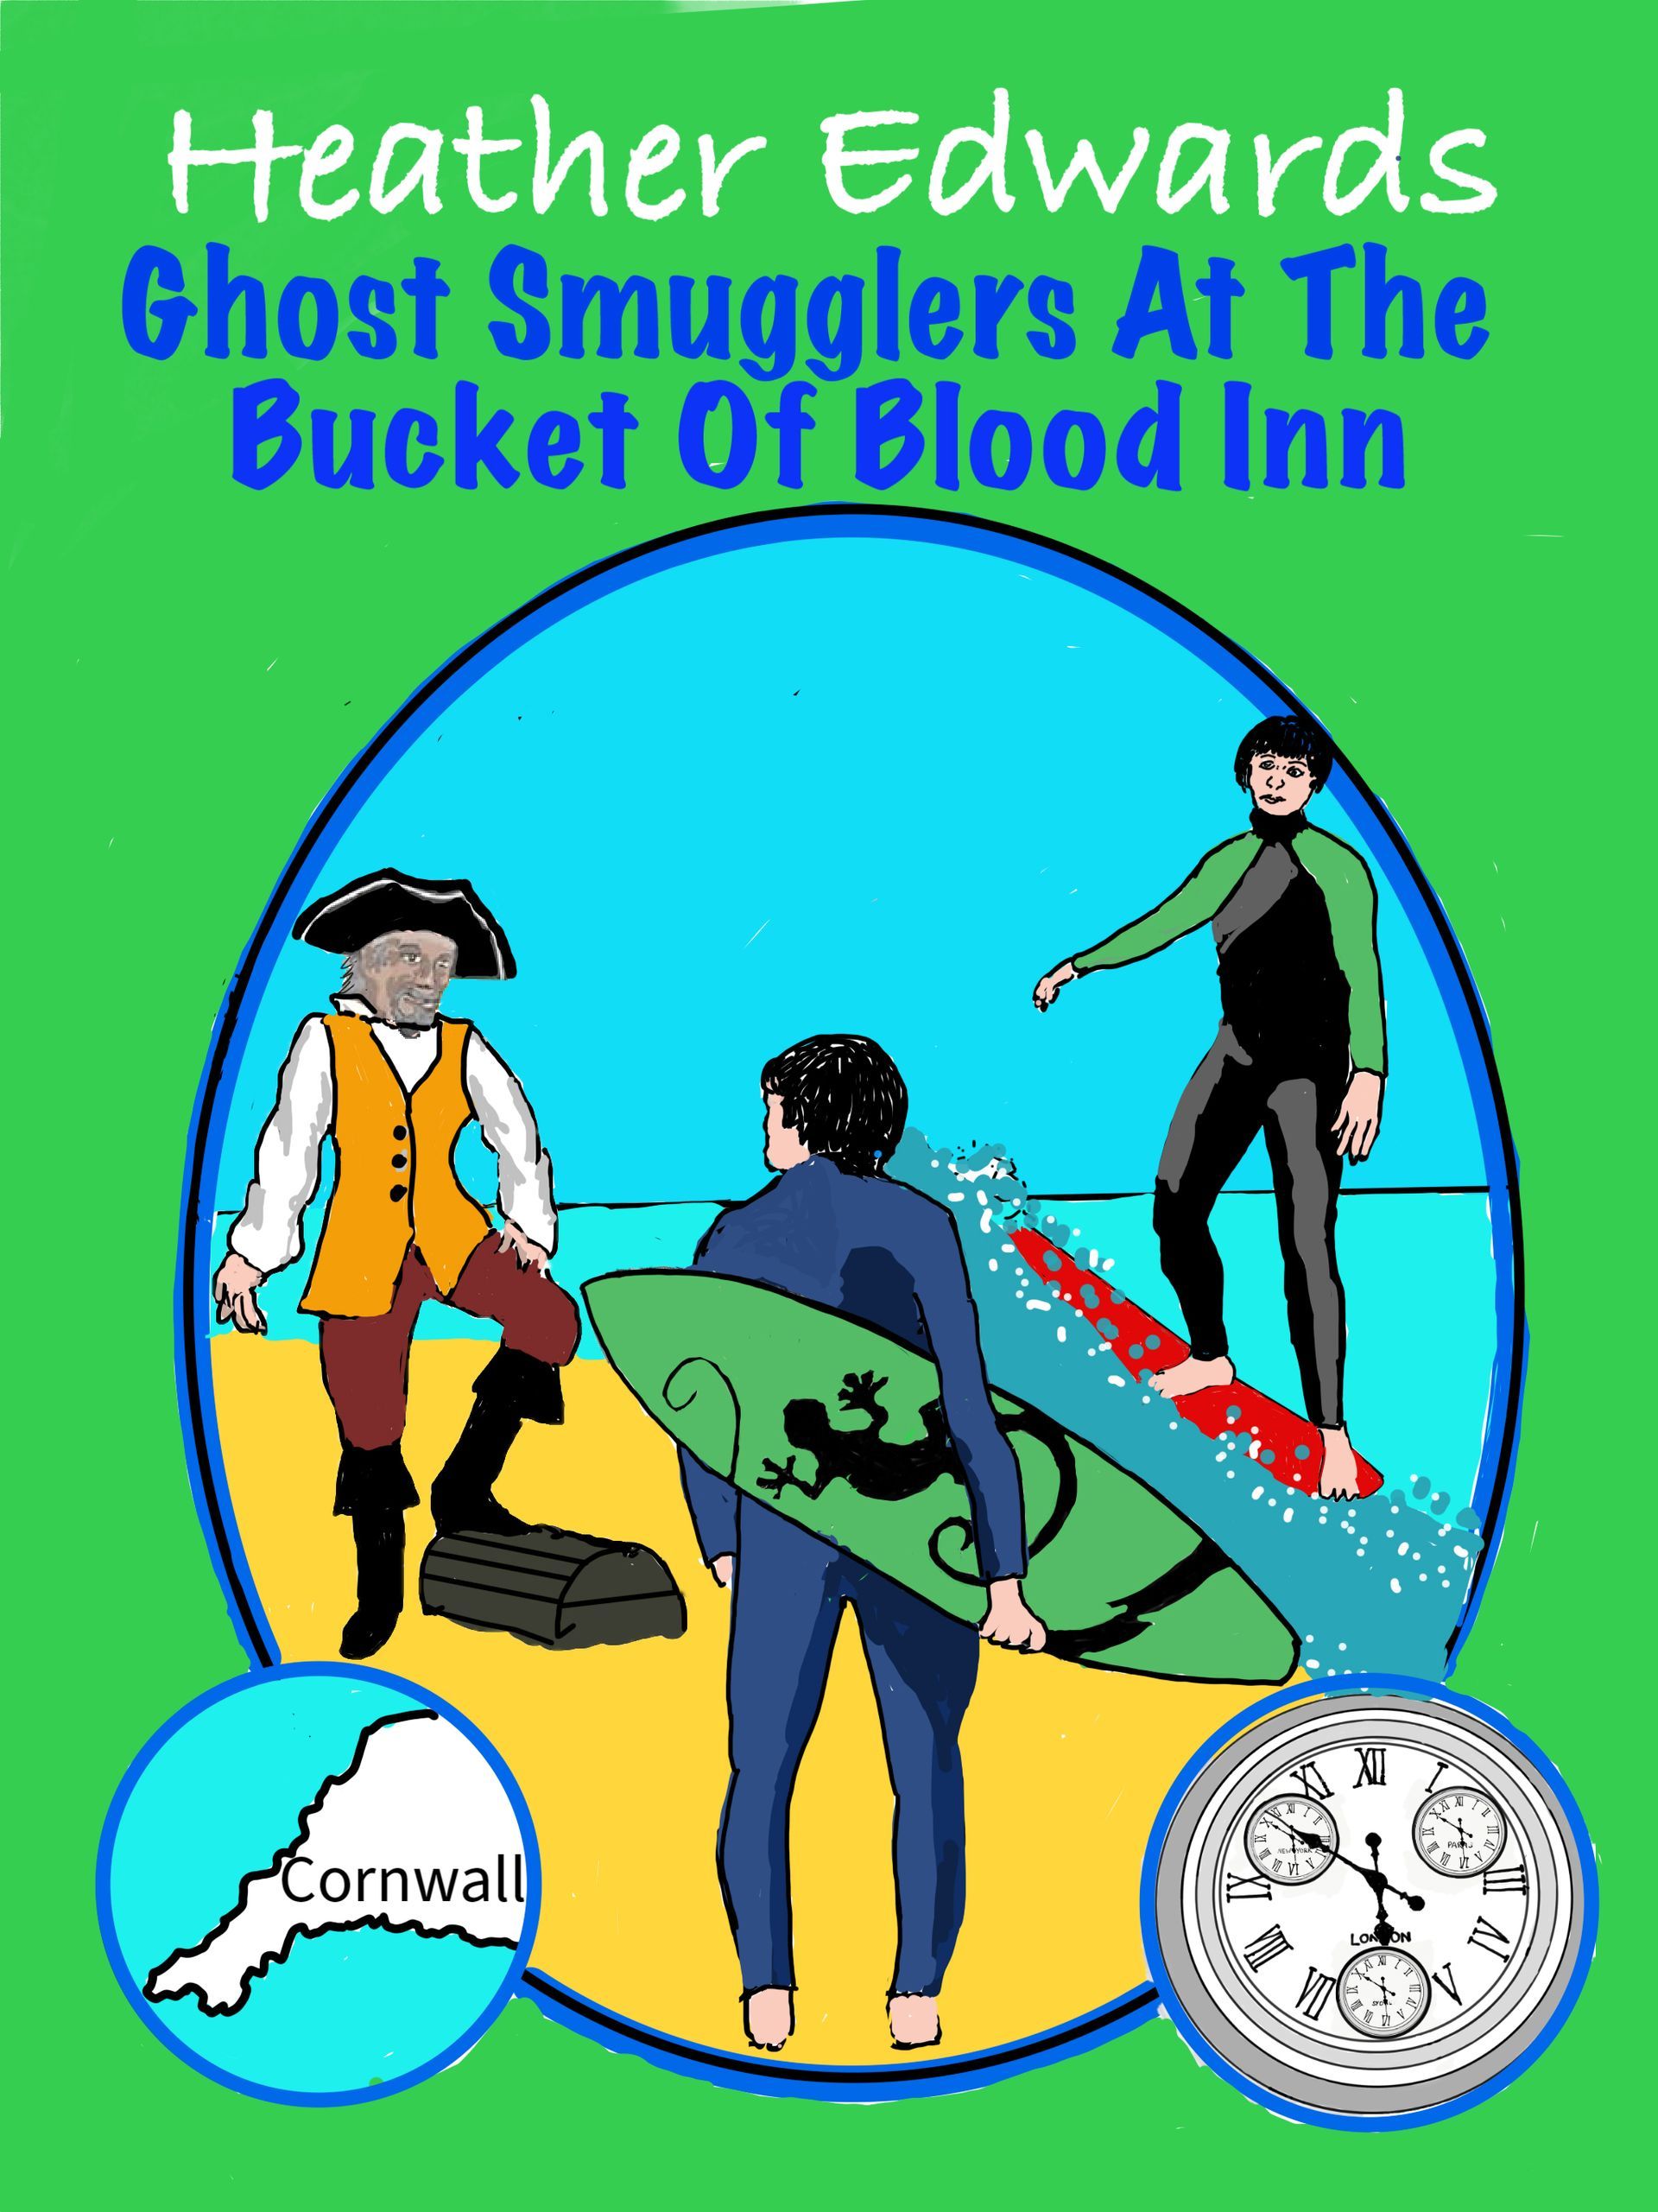 Ghost Smugglers At The Bucket Of Blood Inn Heather Edwards